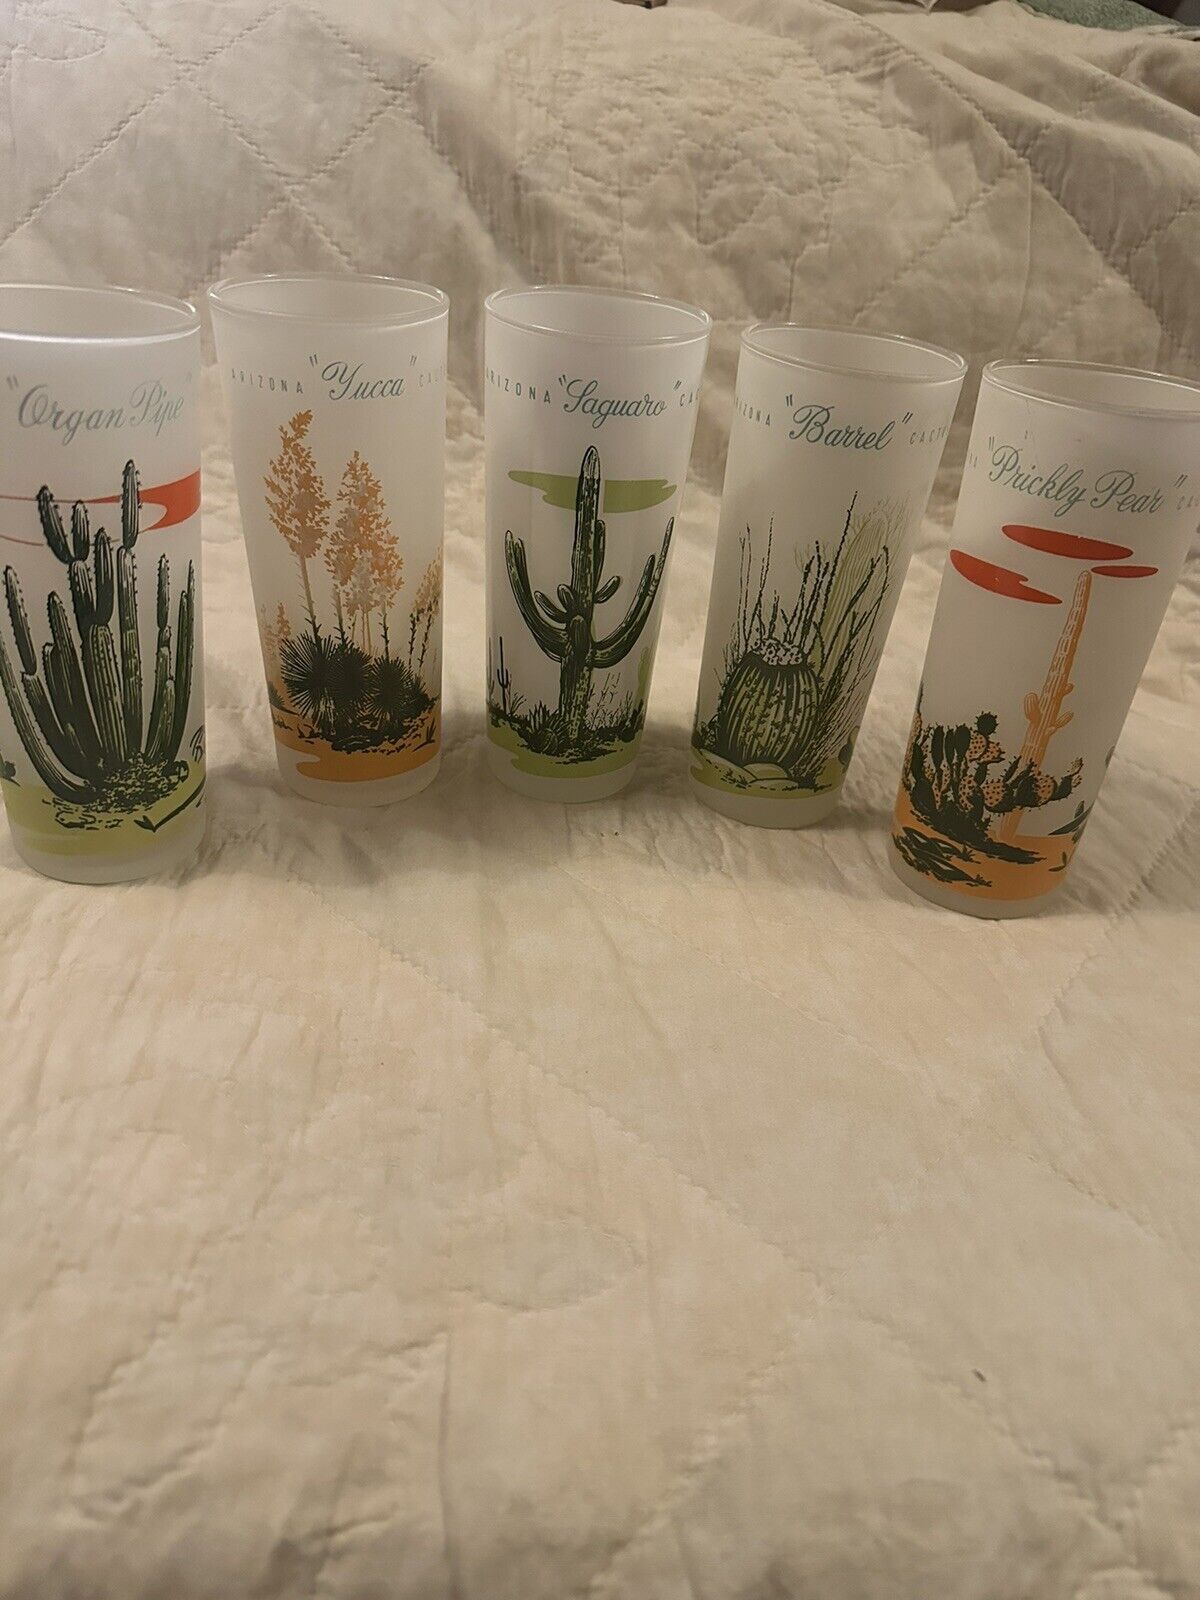 5 VTG BLAKELY OIL GAS AZ CACTUS COLLECTABLE TUMBLERS GLASSES FROSTED TOM COLLINS